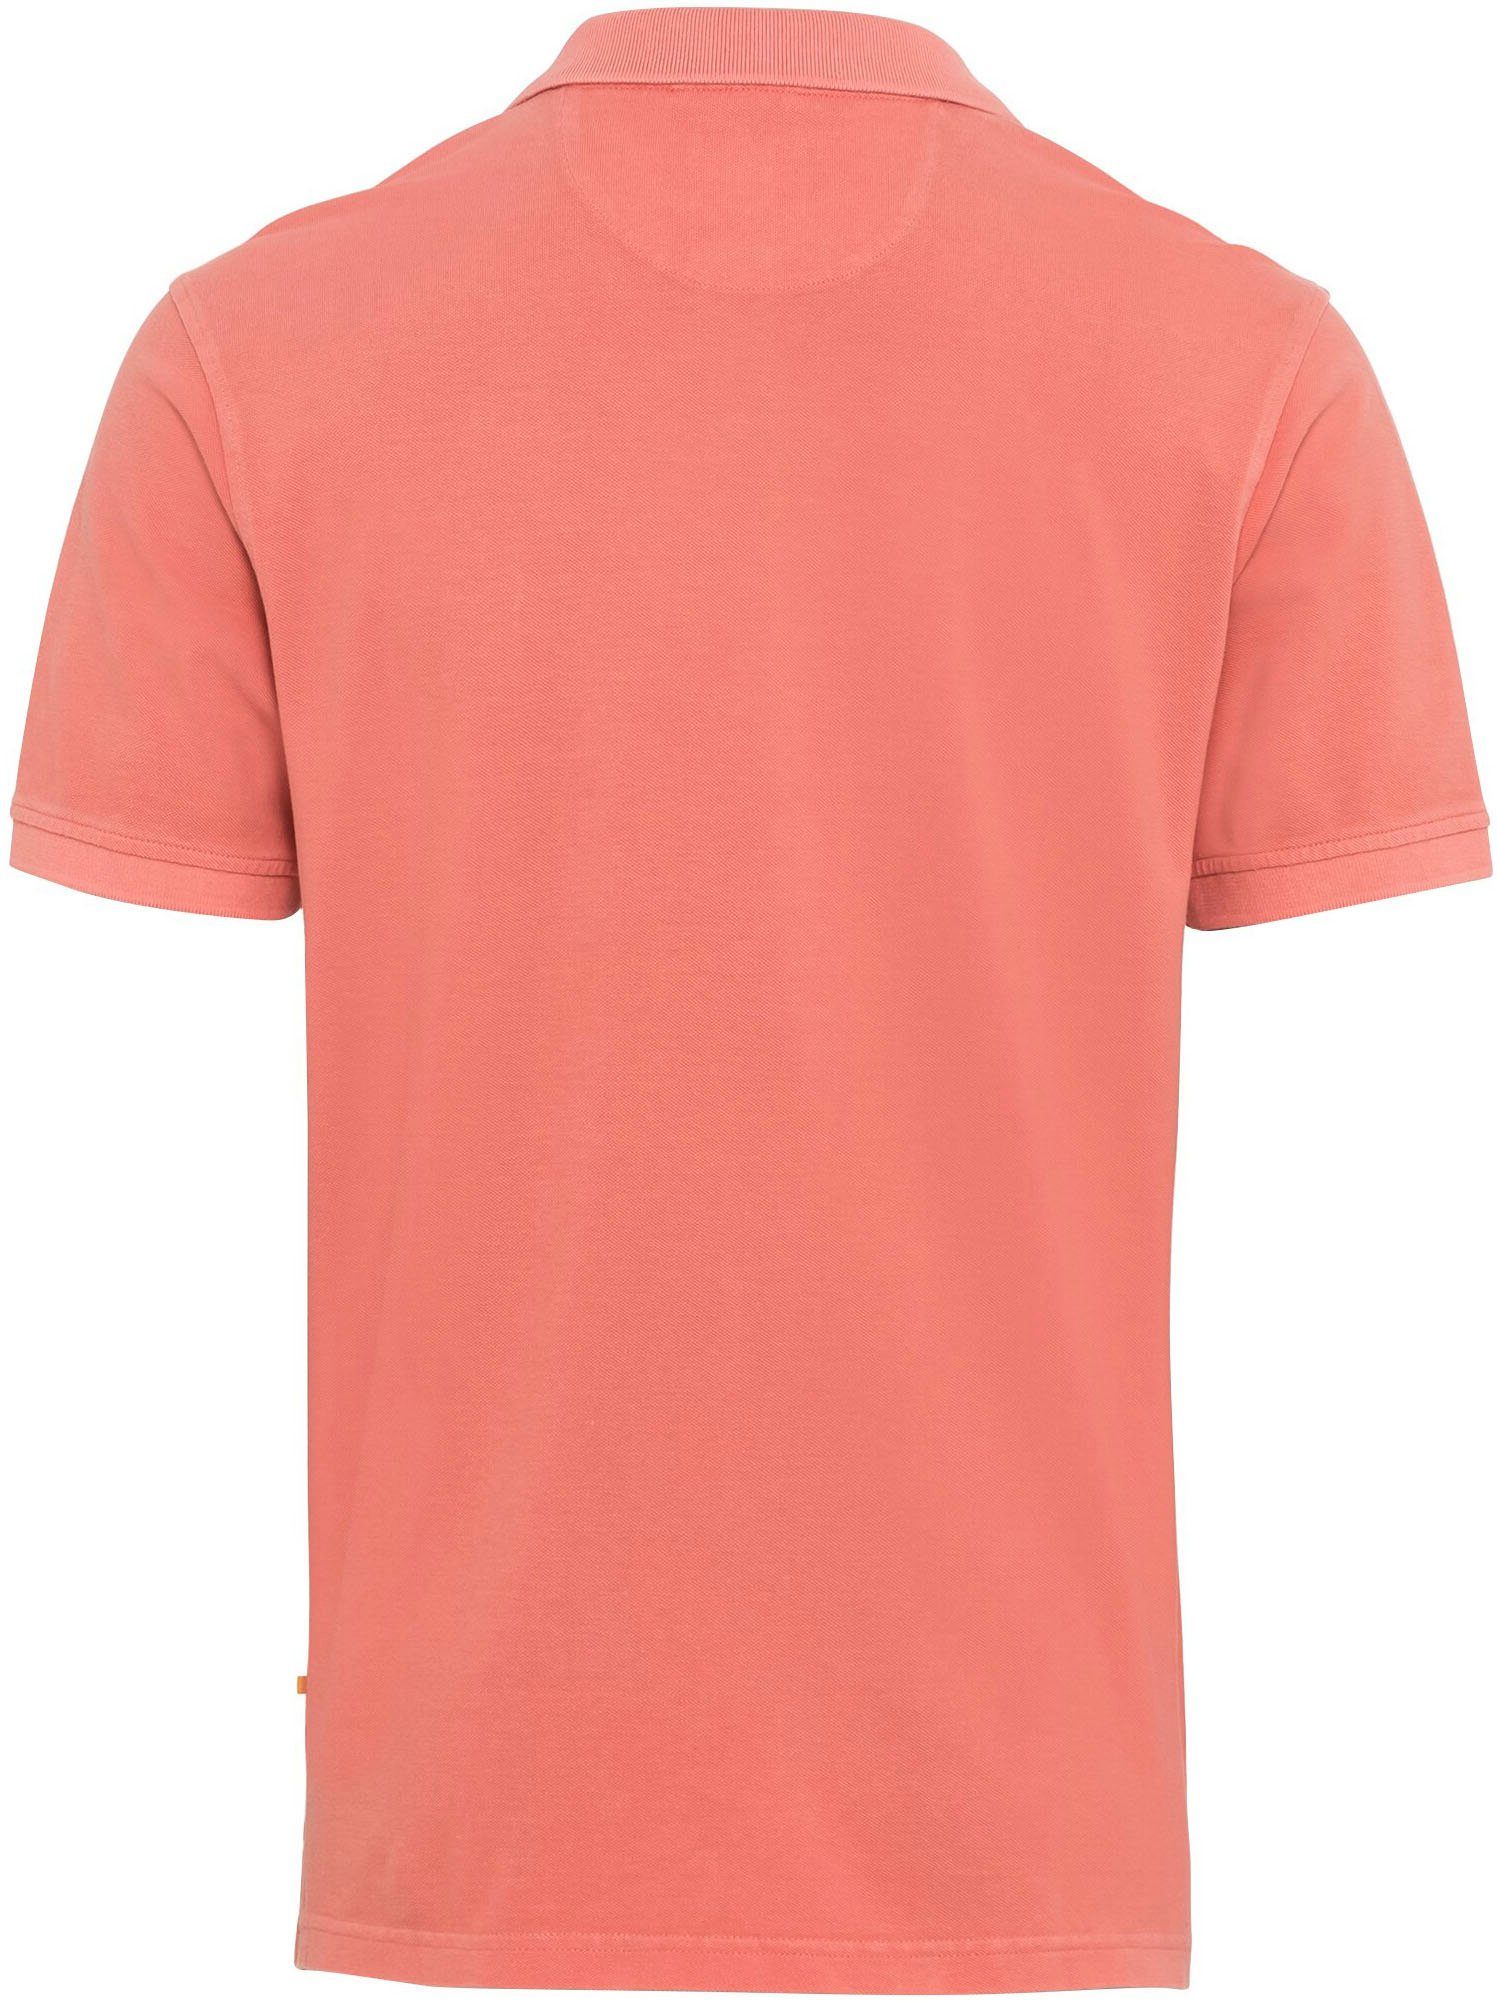 camel active Poloshirt Coral red